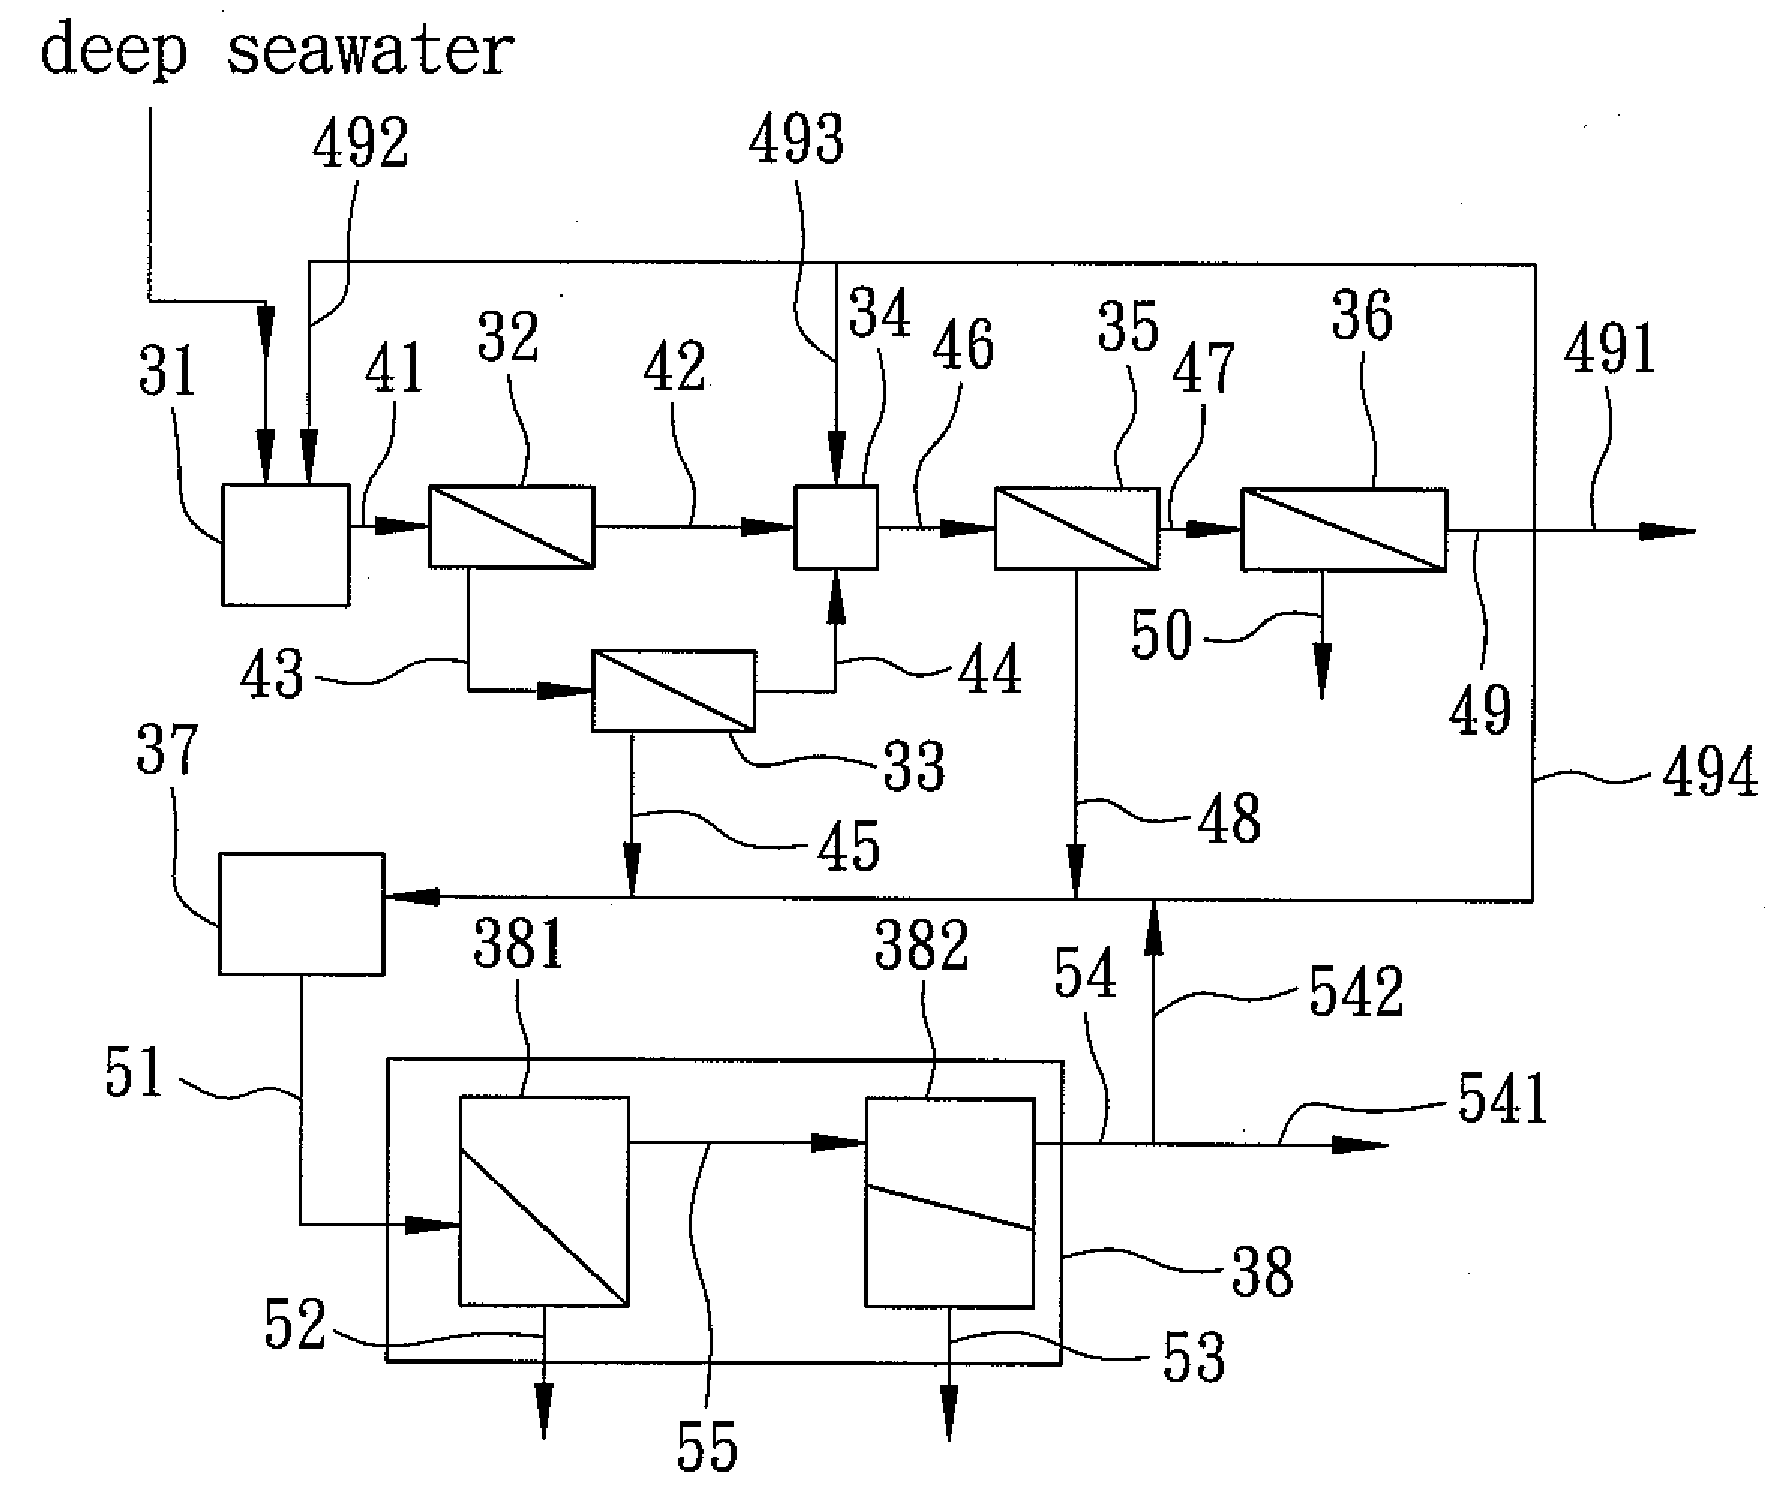 Method for Making Reverse Osmosis Permeate Water and Mineral Water From Deep Seawater